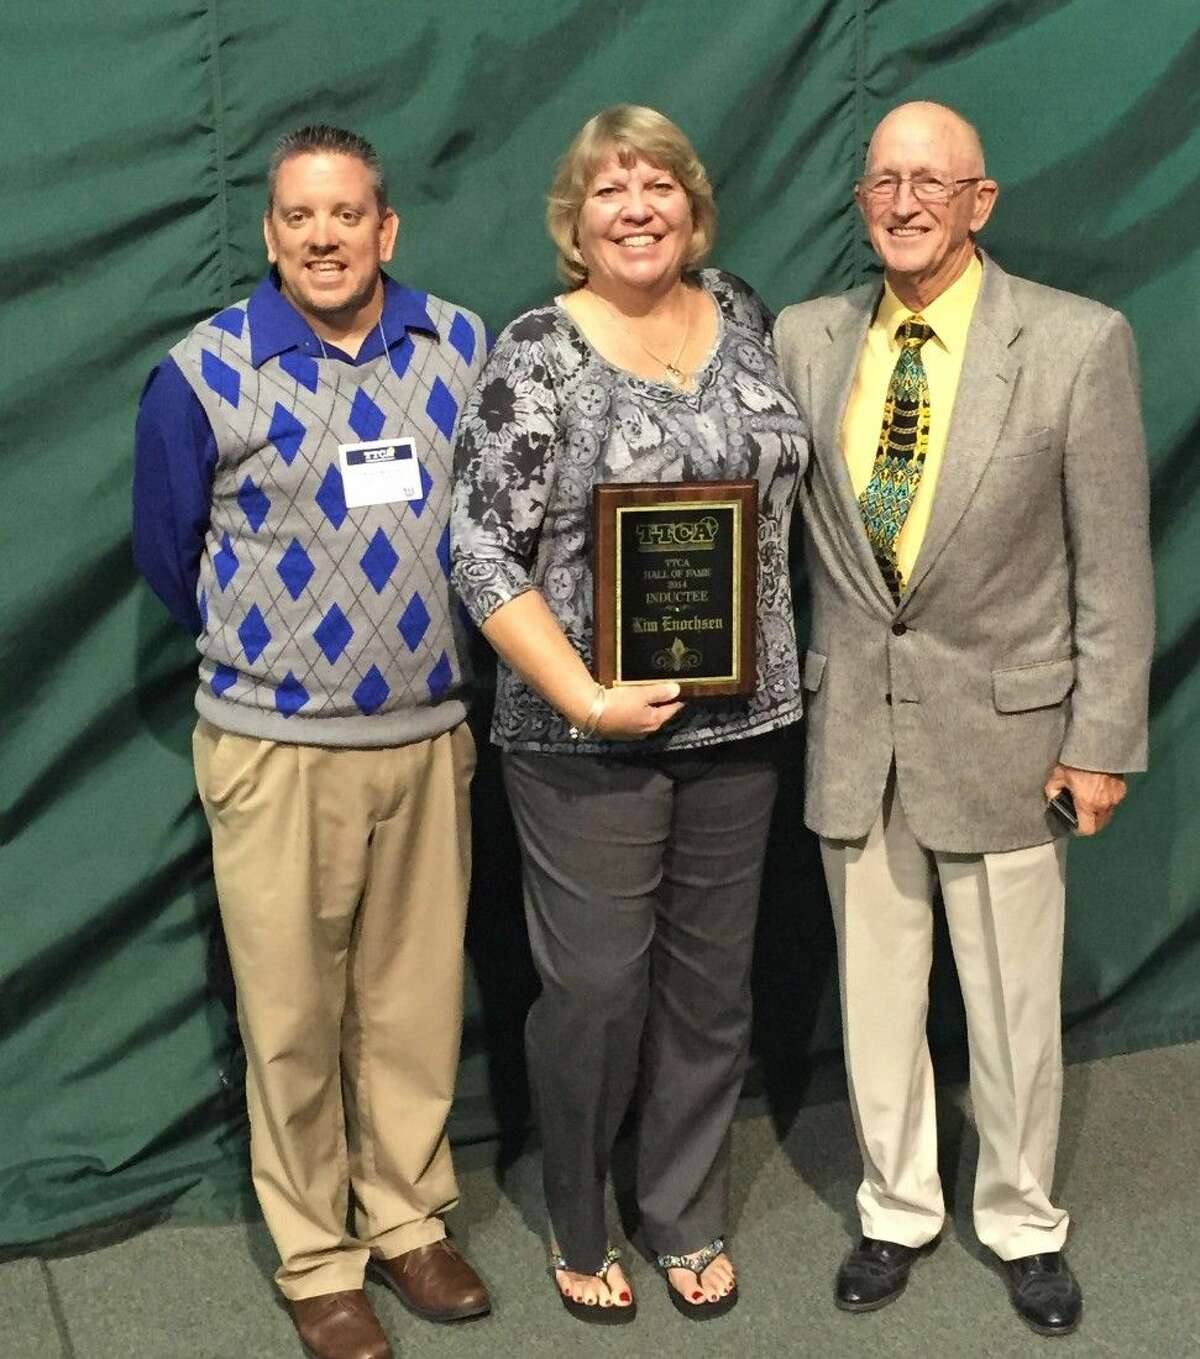 Texas Tennis Coaches Association Hall of Fame Induction. Pictured left to right, Kingwood High School Tennis Coach Kevin McElroy, Coach Kim Enocksen and Coach Jerry Franklin.